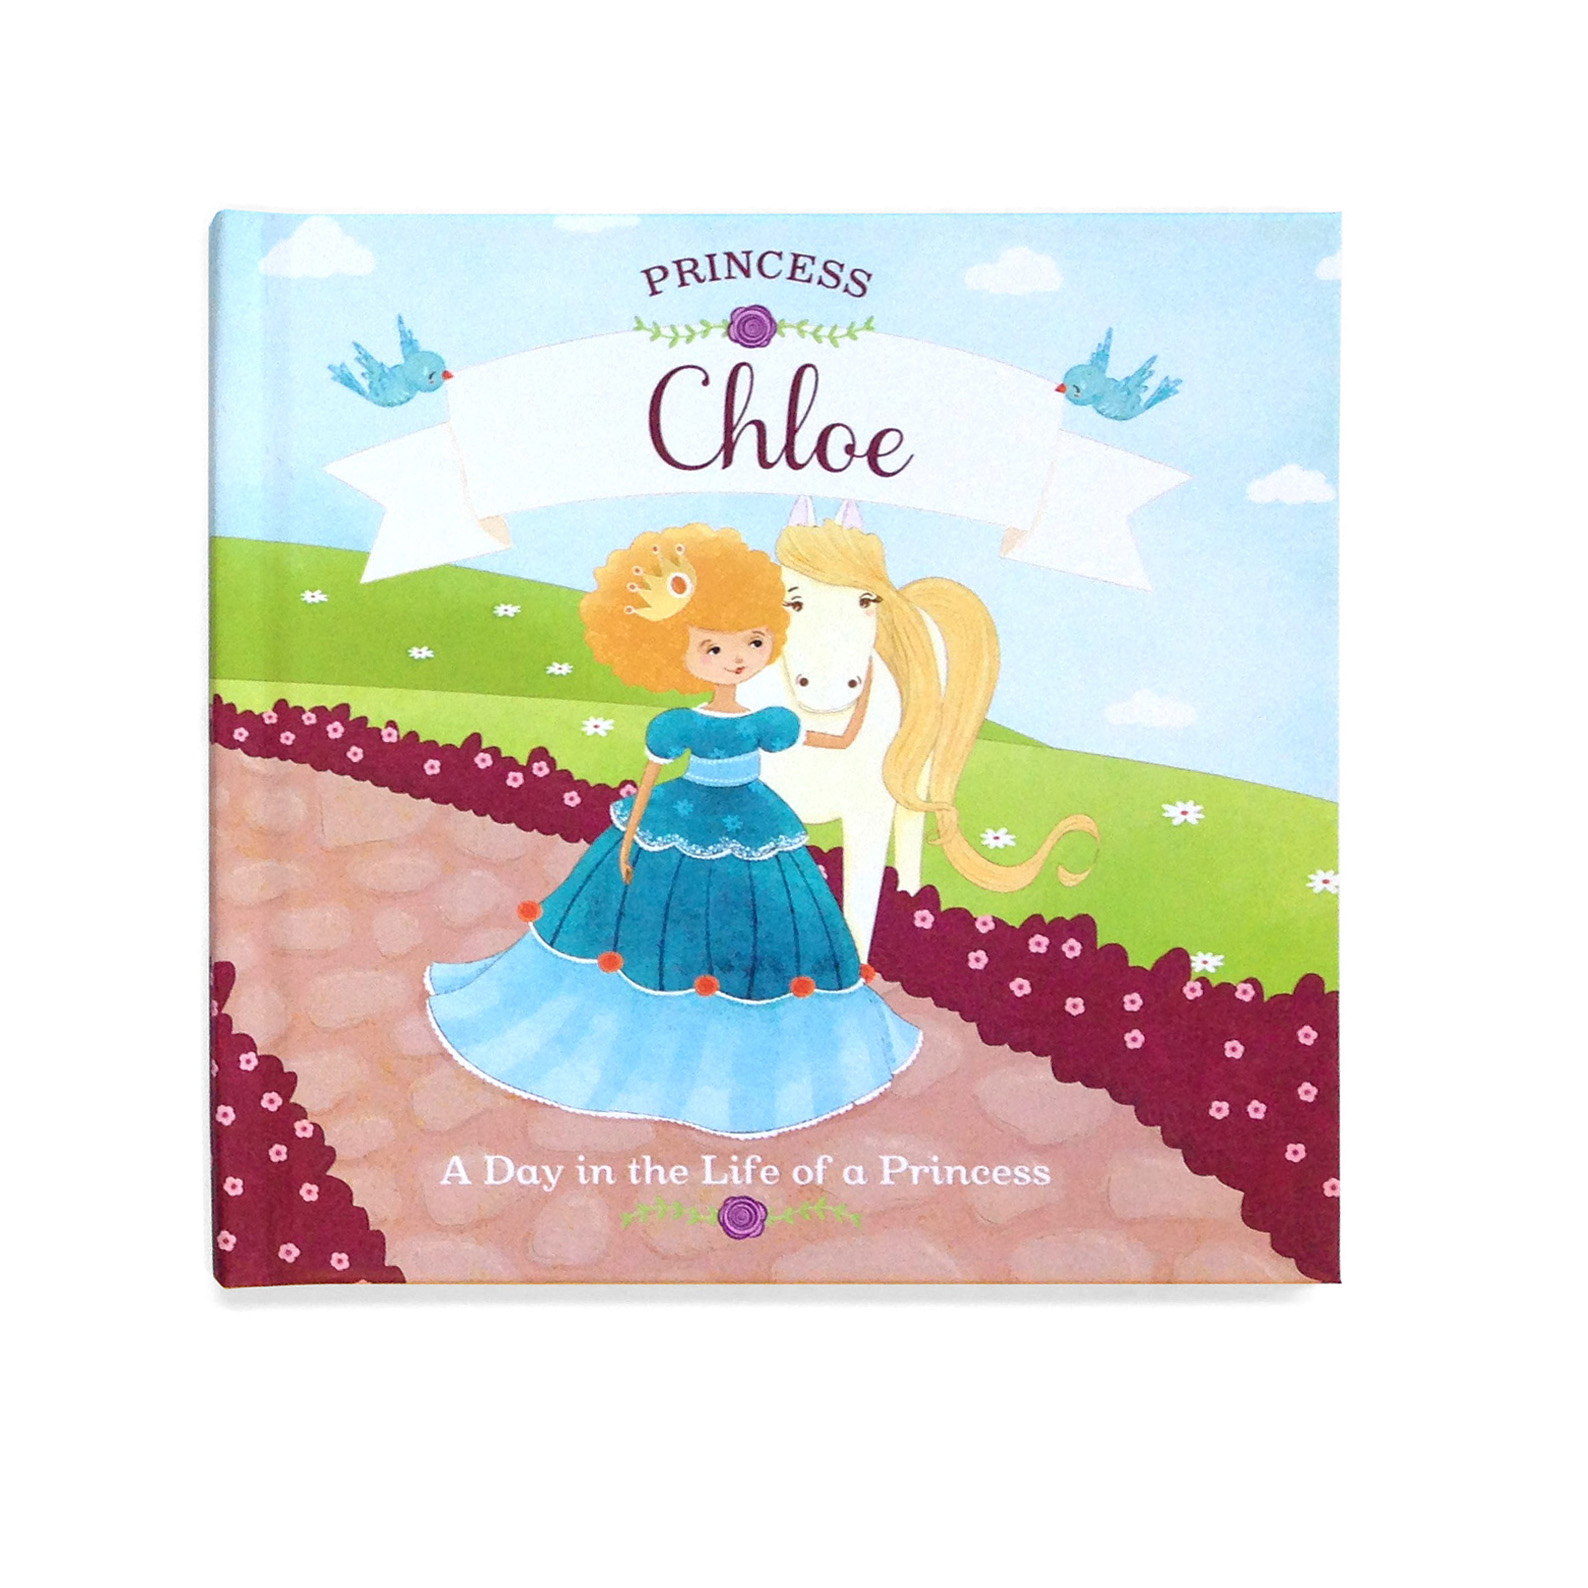 “Princess: A Day in the Life of a Princess" is a charming personalized storybook that turns its young reader into a princess.